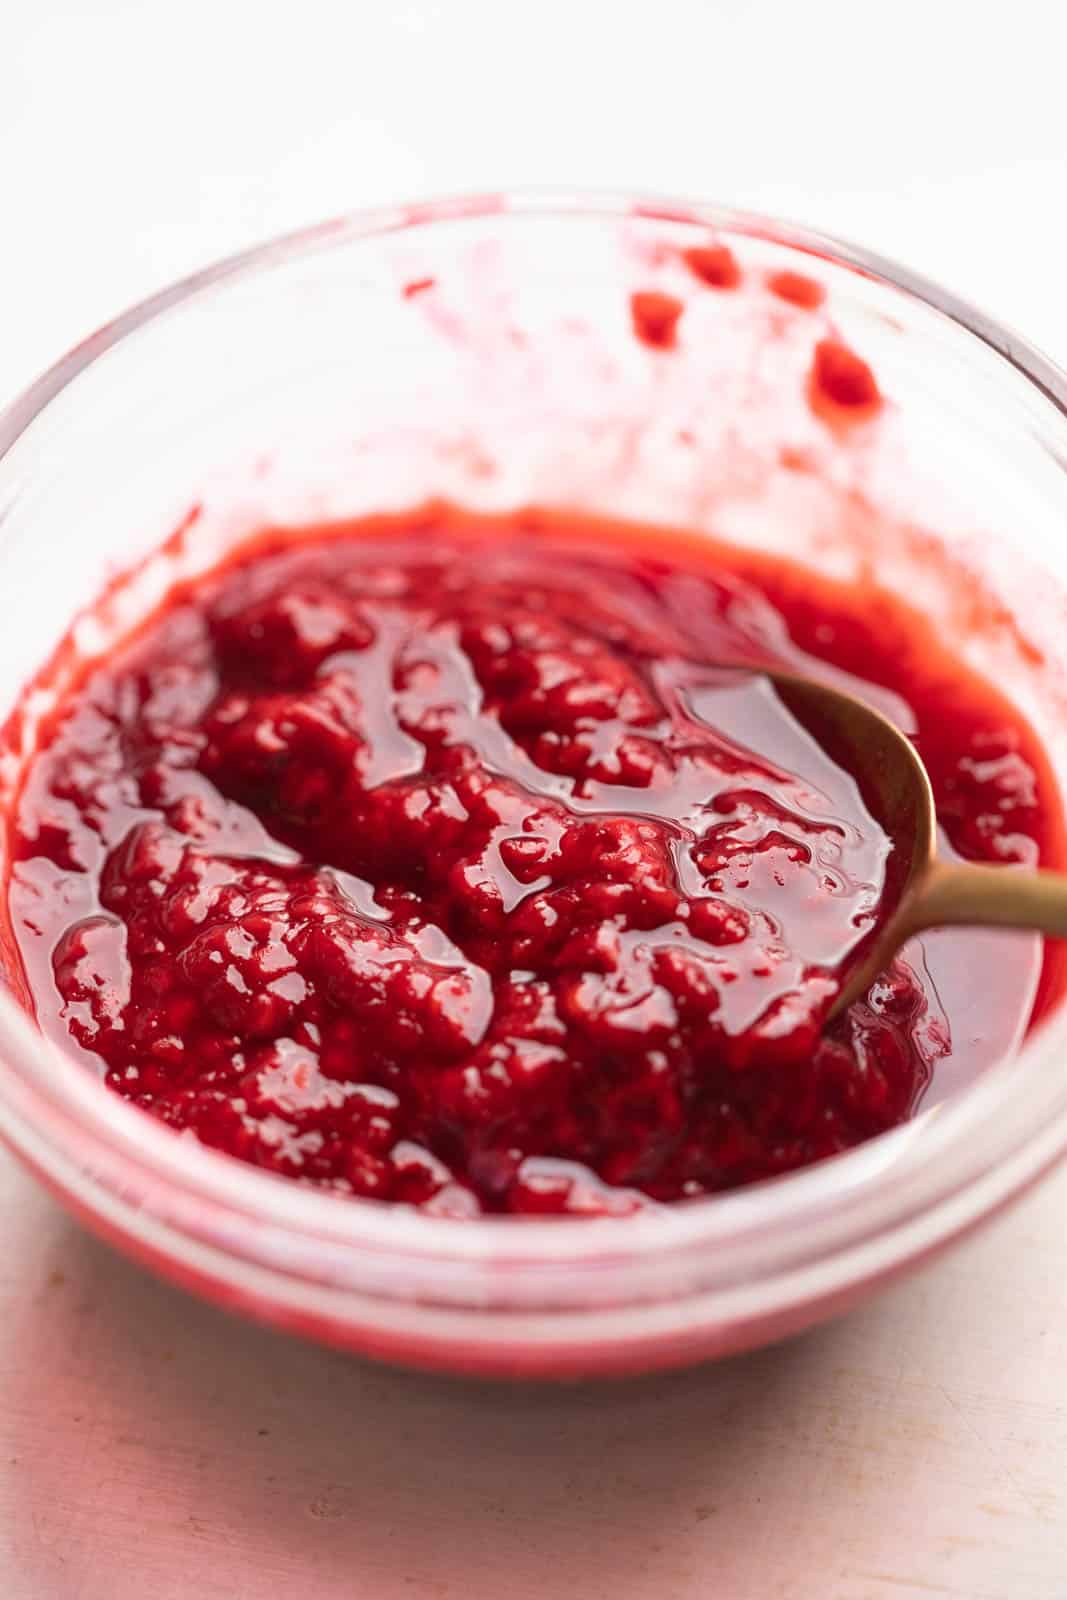 Raspberry coulis in a bowl with a spoon